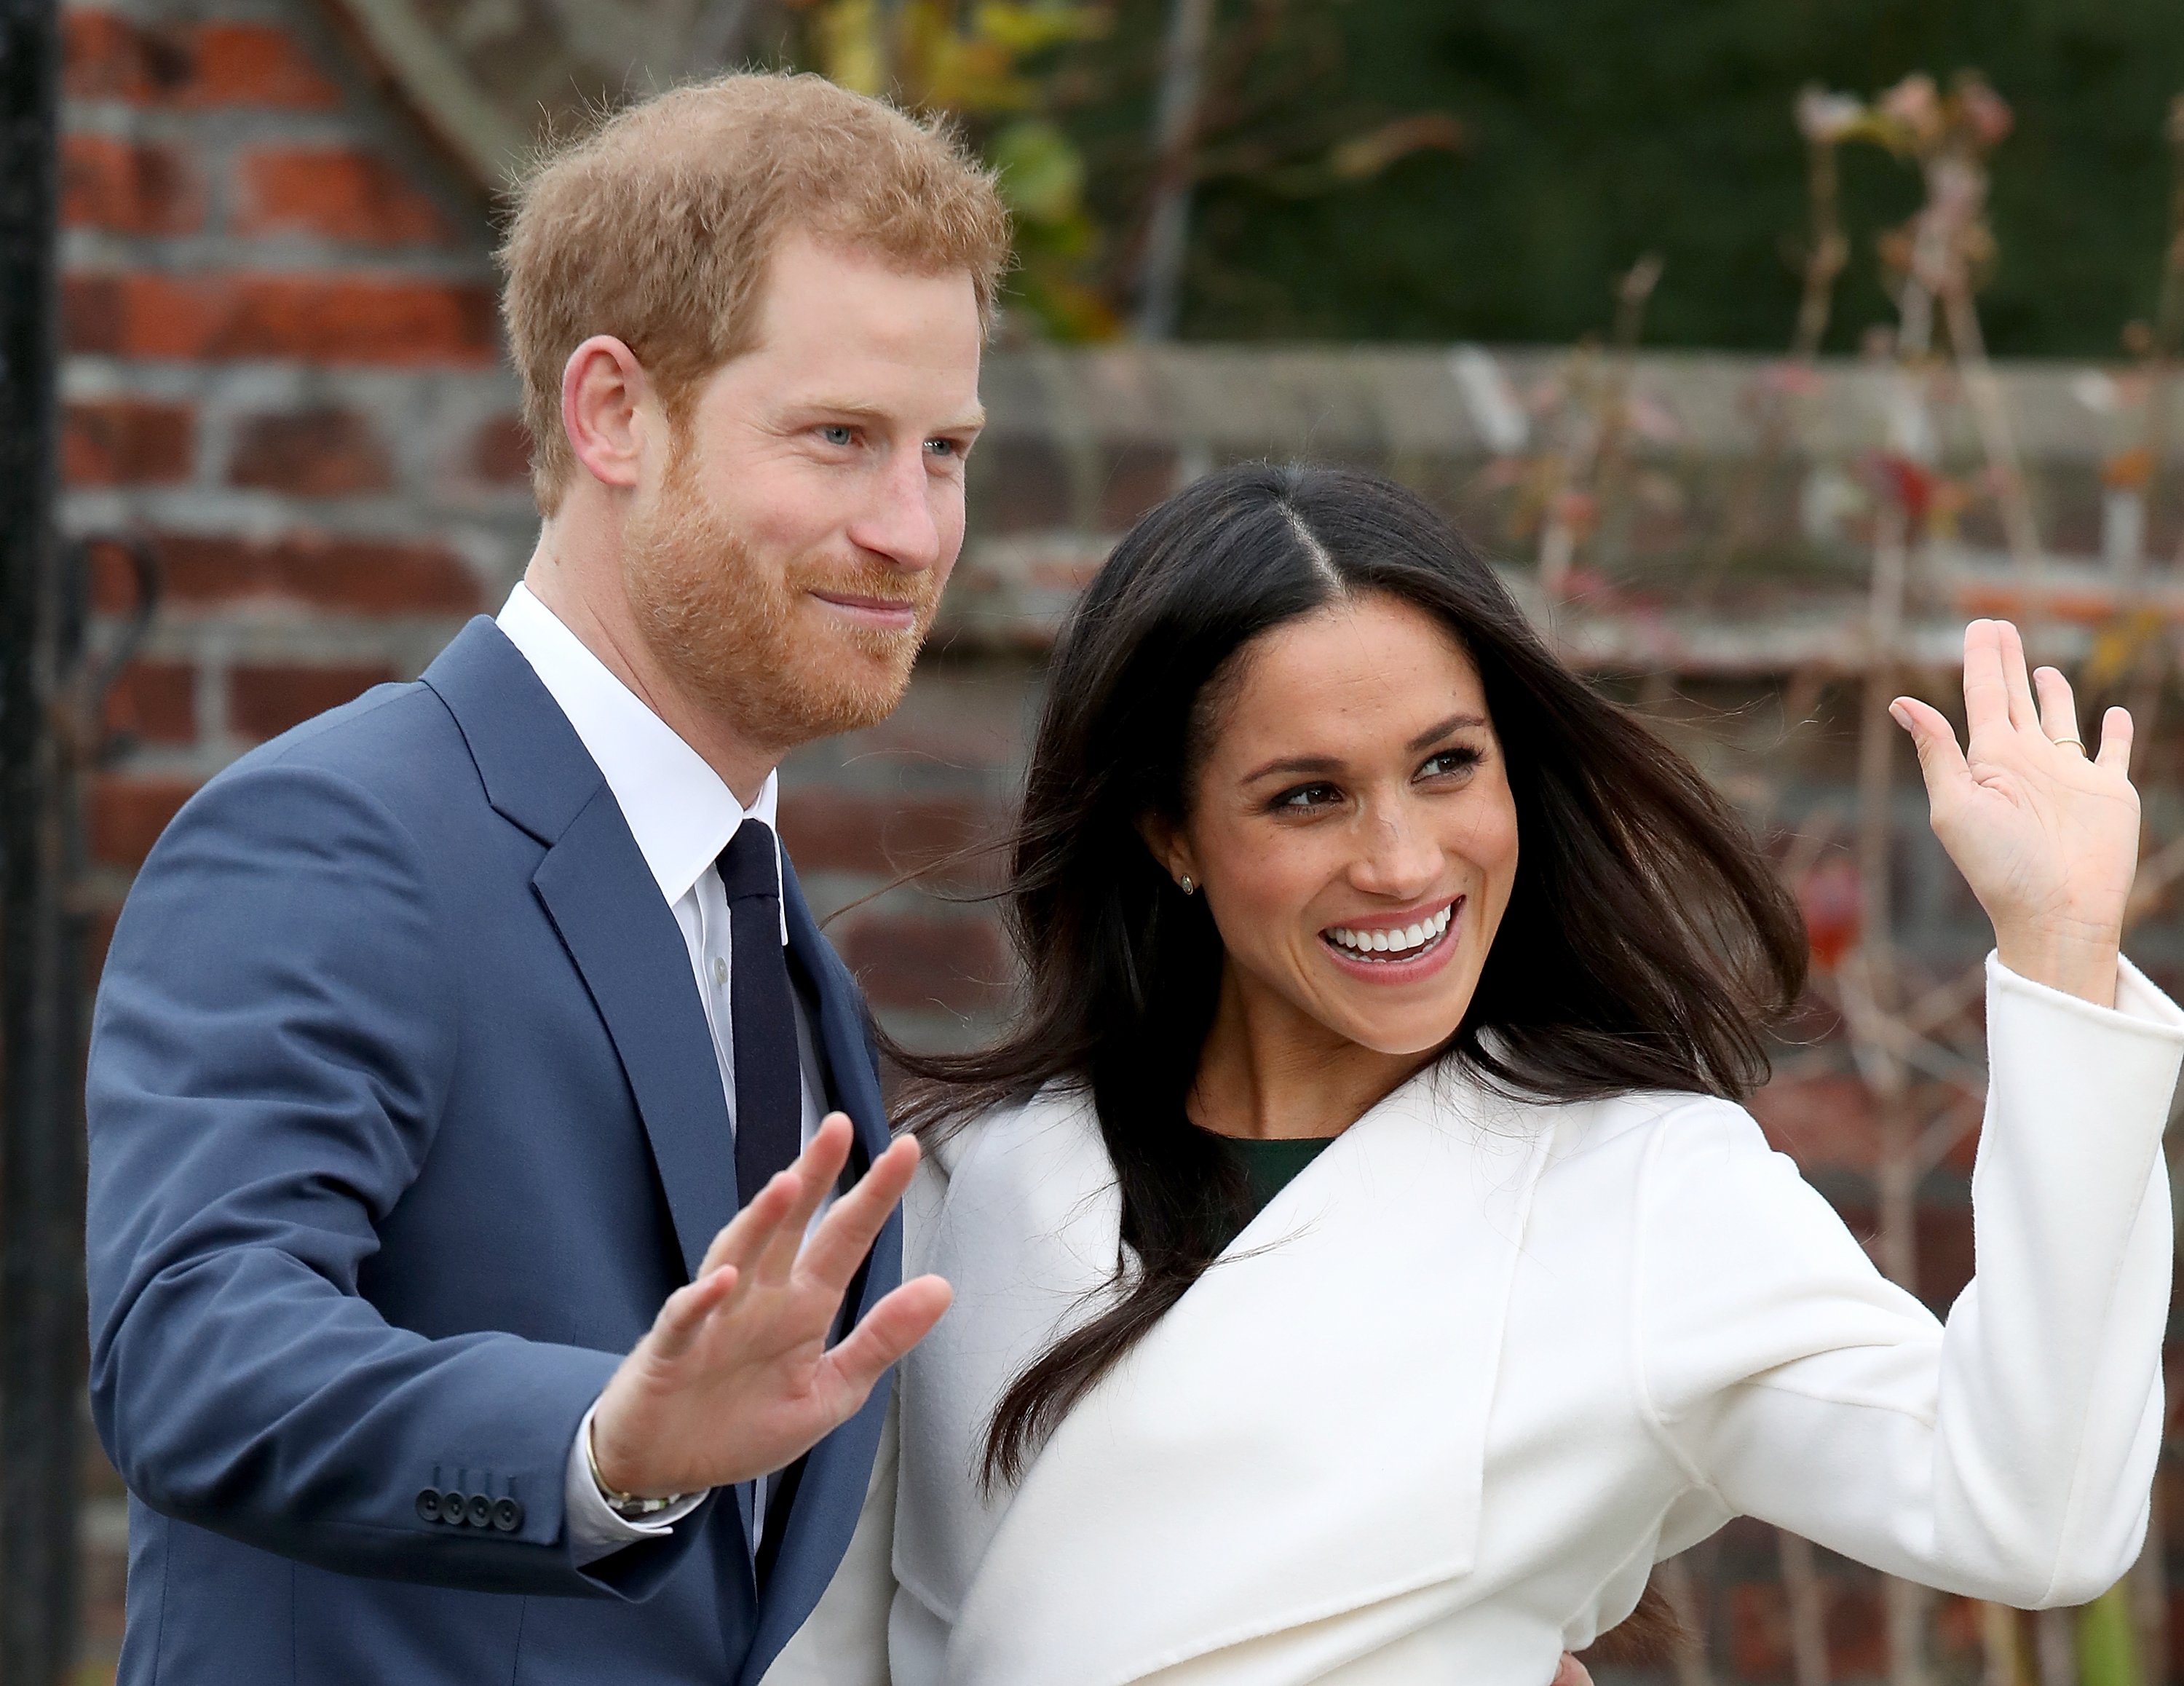 Prince Harry and Meghan Markle during an official photocall to announce their engagement at The Sunken Gardens at Kensington Palace on November 27, 2017. | Photo: Getty Images